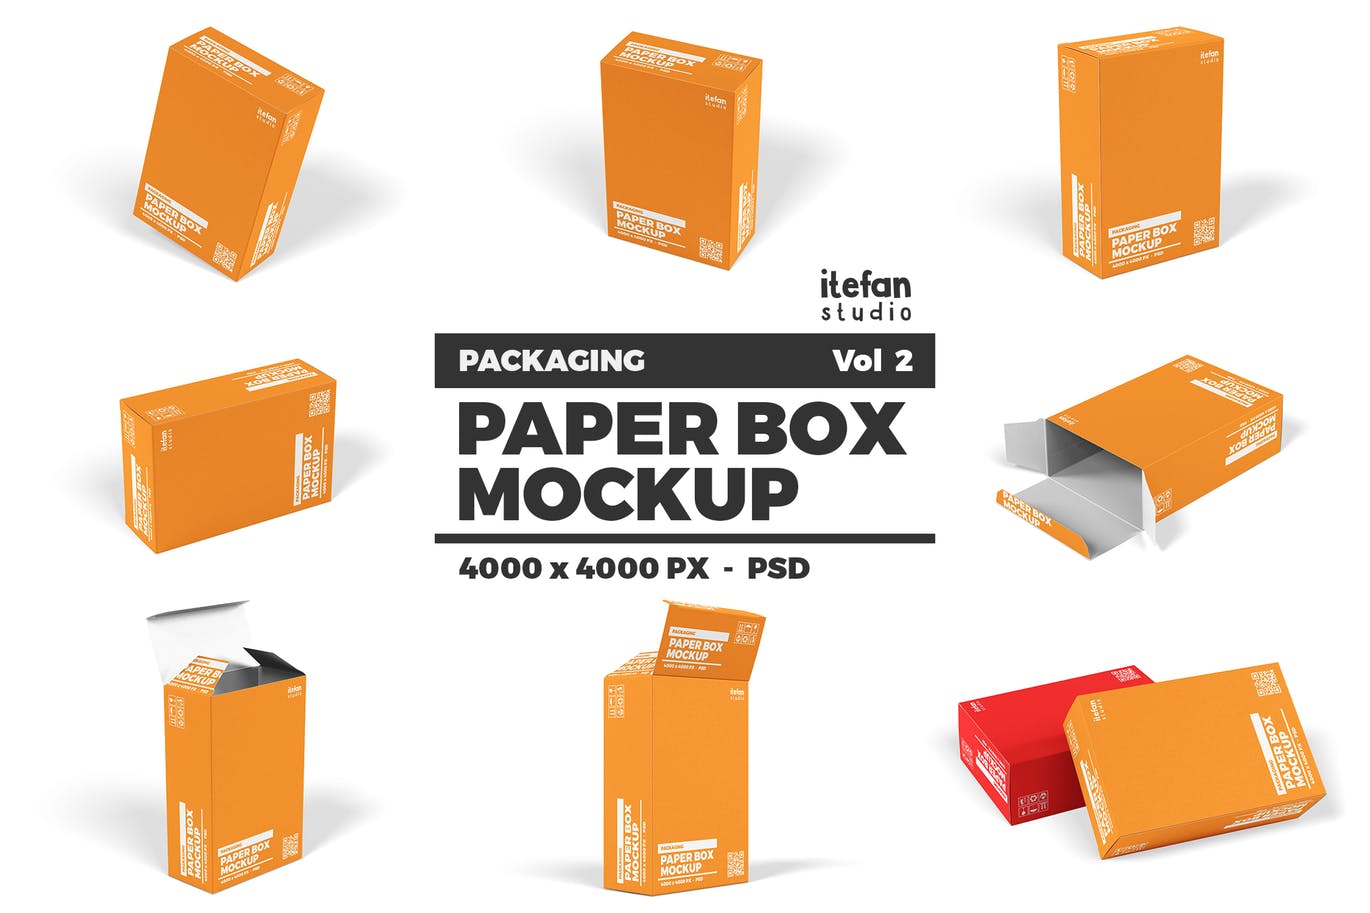 Download Free 50 High Quality Product Packaging Psd Mockup Templates Decolore Net PSD Mockups.